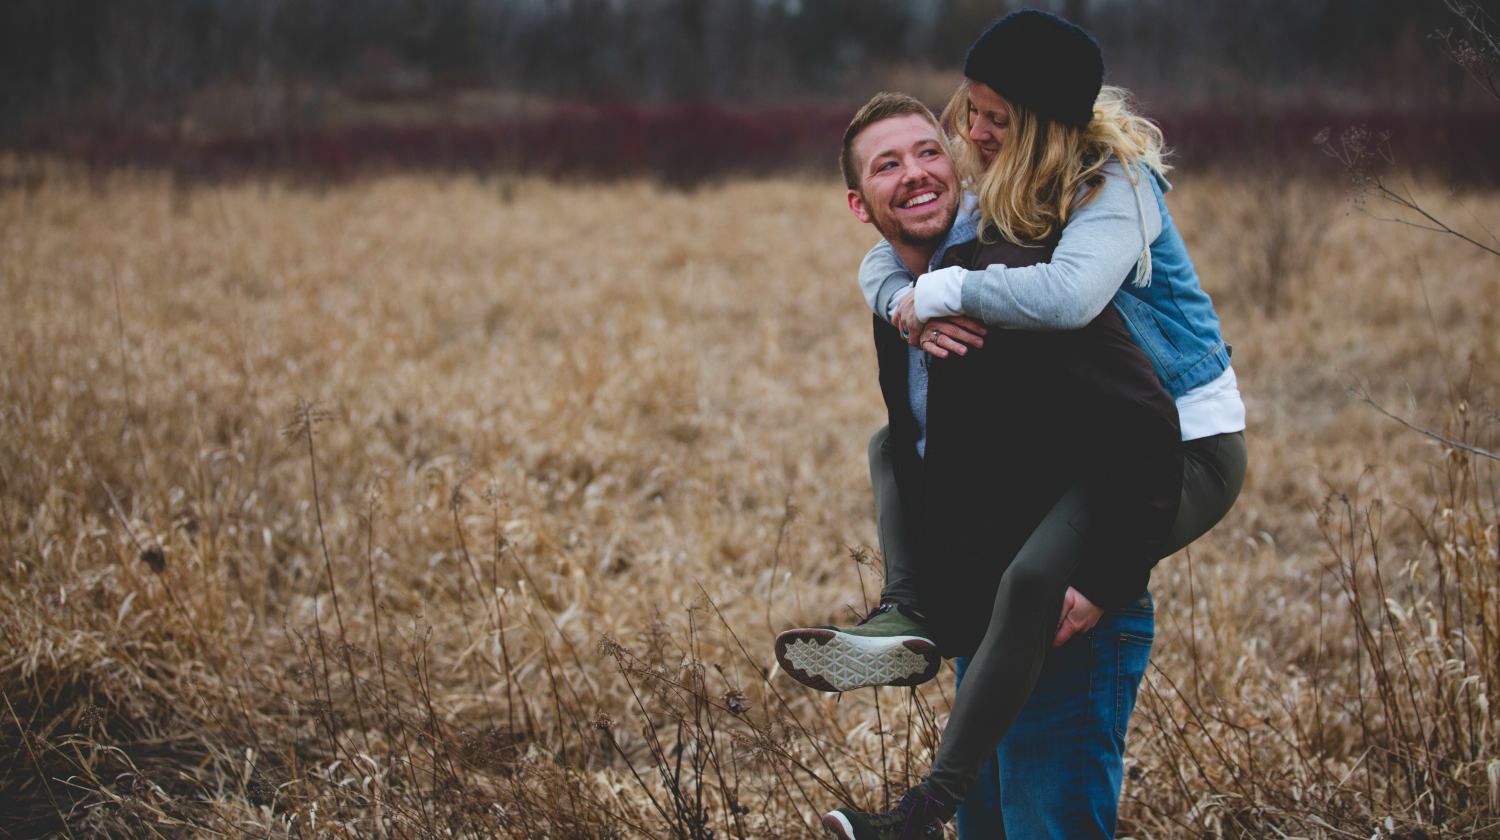 man carrying woman standing on the ground | Fun Fall Date Ideas For Any Relationship Stage | fall date ideas | first date ideas | Featured